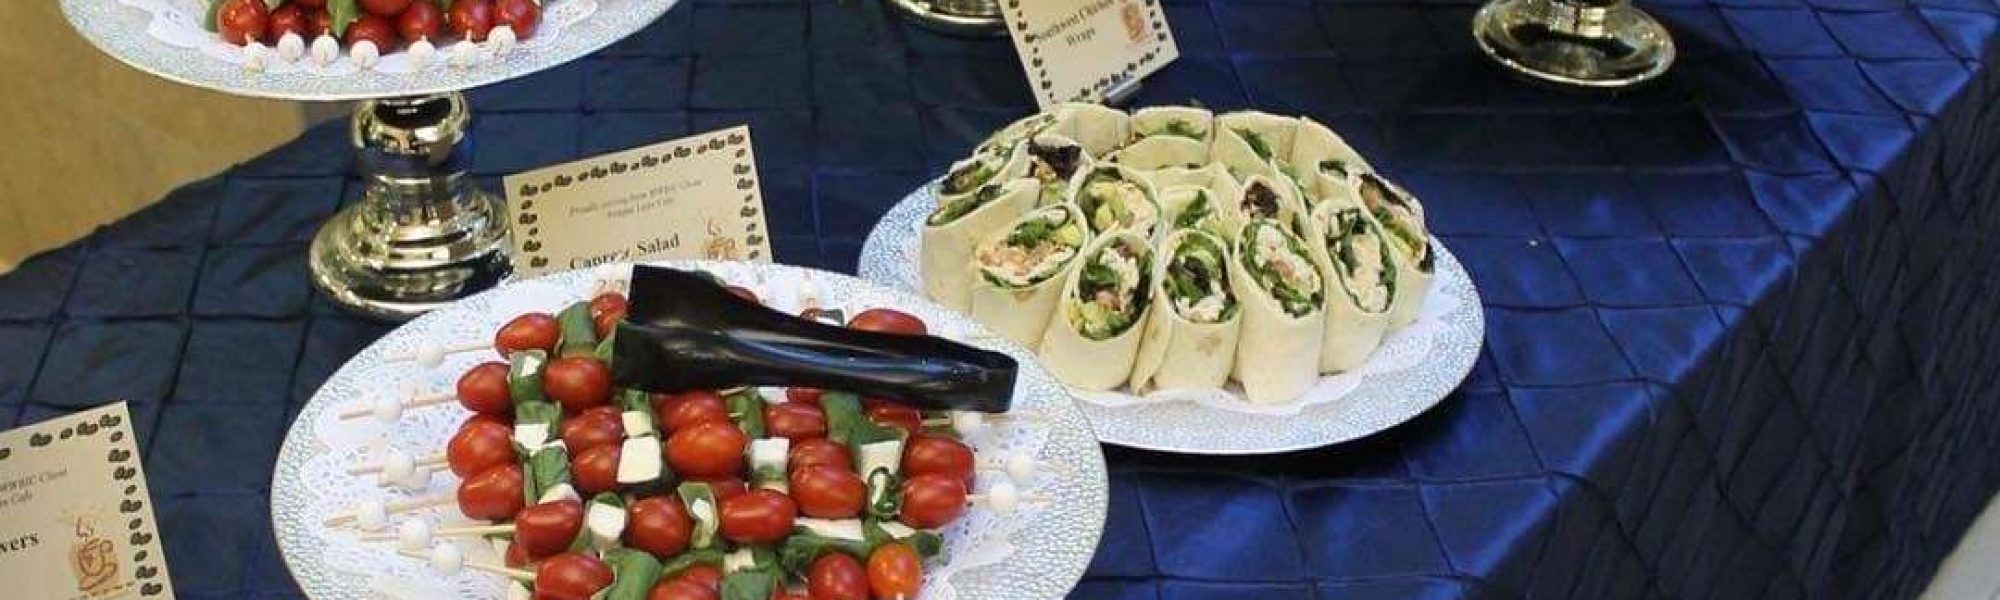 Appetizers on table with dark blue linens